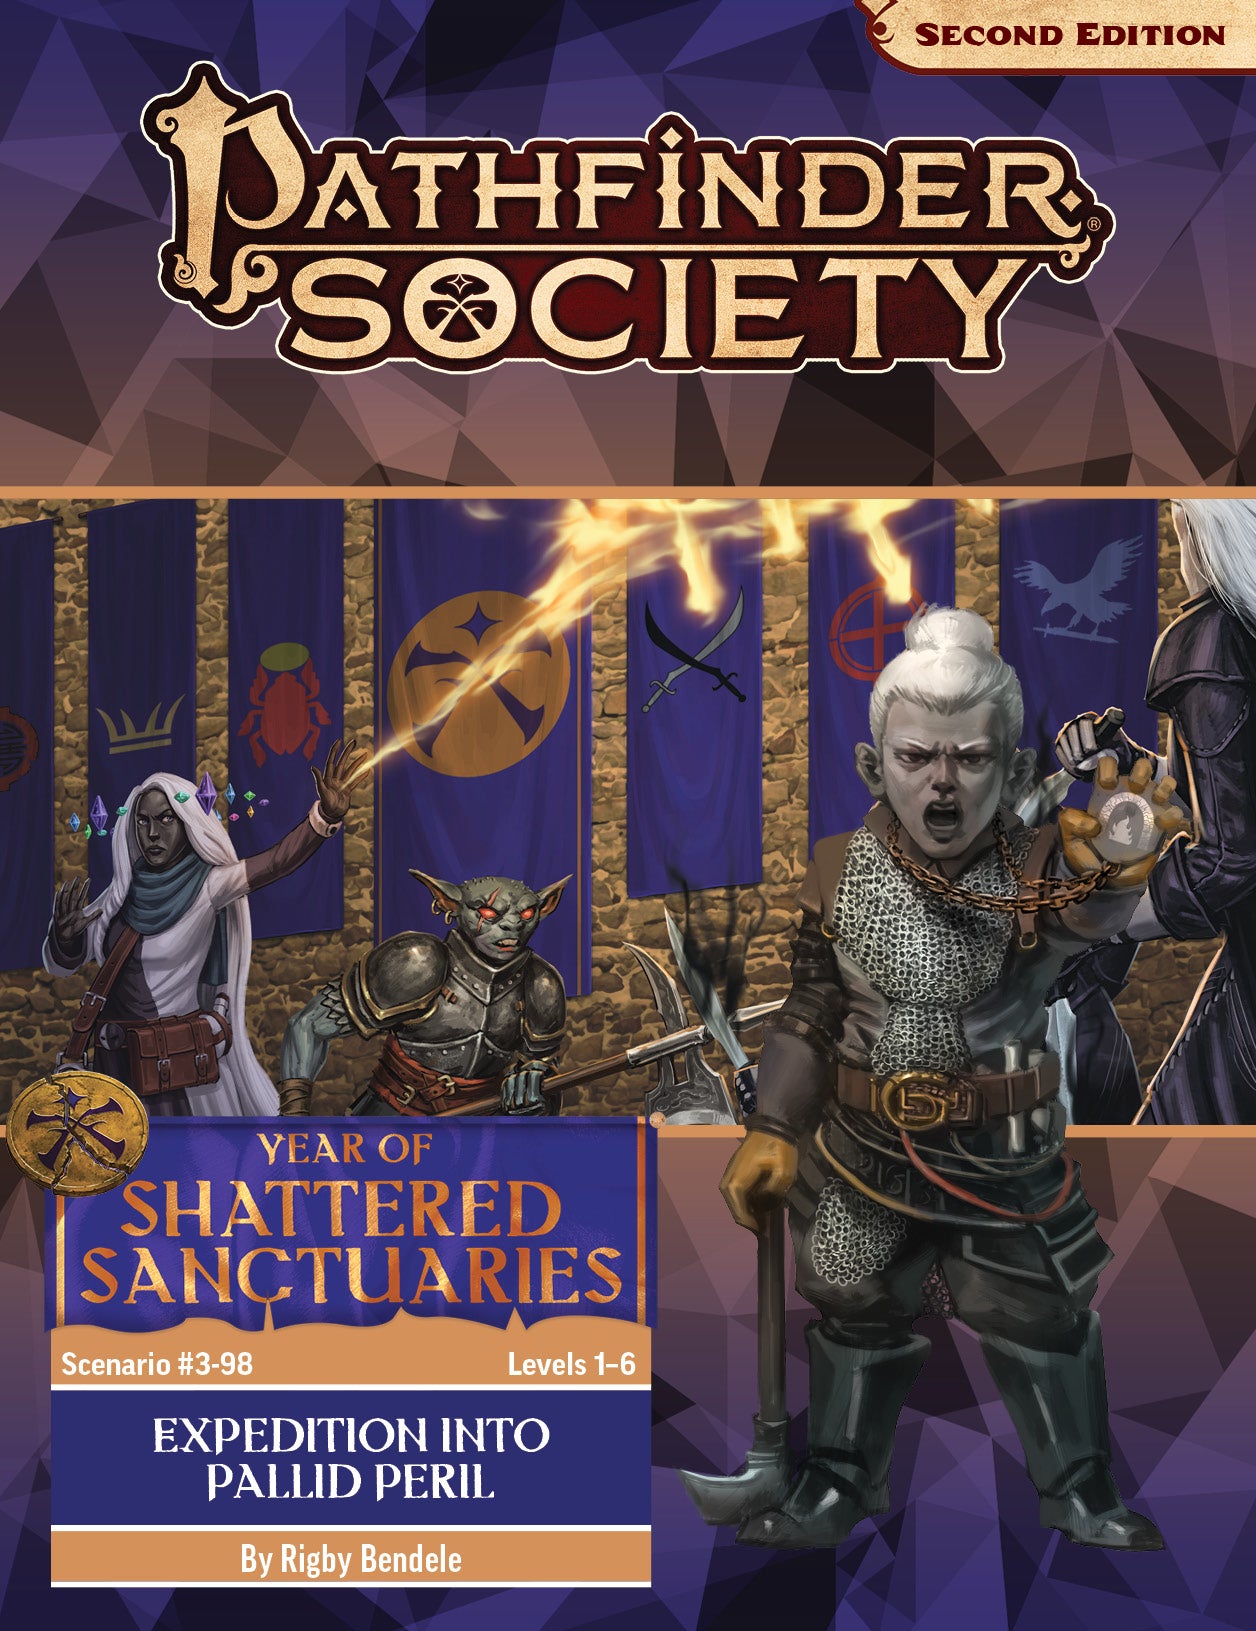 Pathfinder Society Second Edition: Year of Shattered Sanctuaries - Expedition Into Pallid Peril By Rigby Bendele